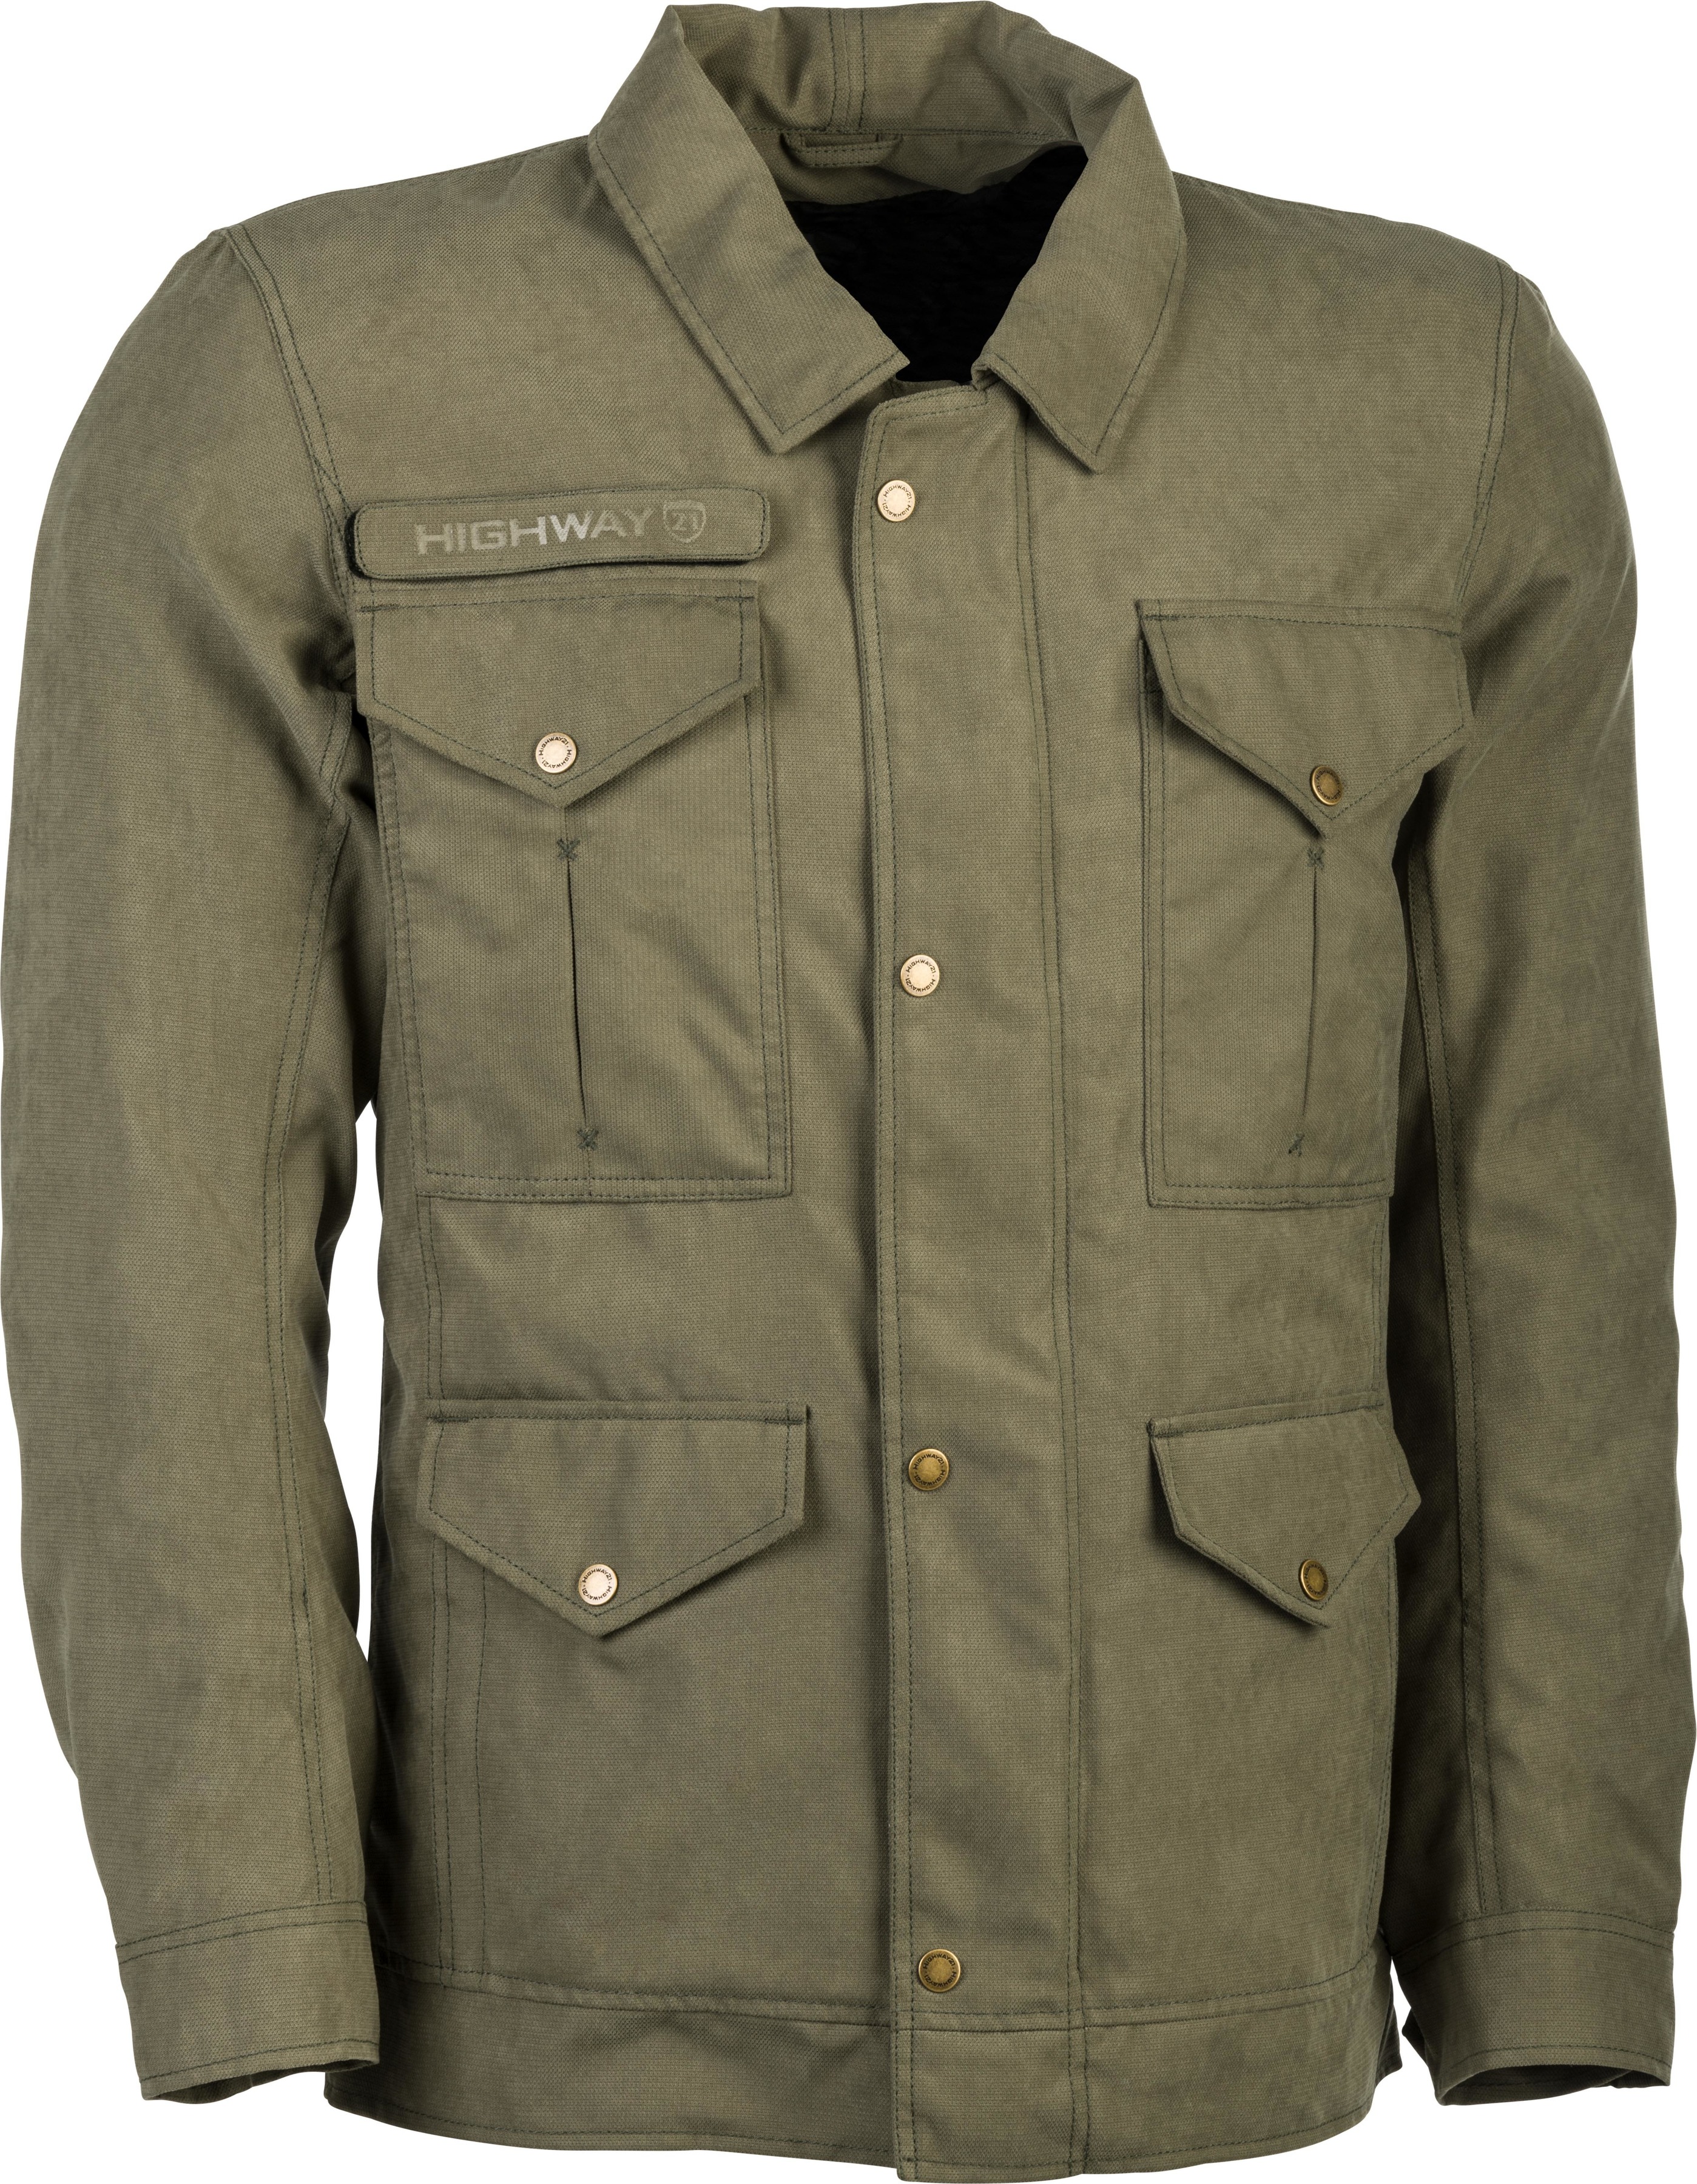 Winchester Riding Jacket Green 3X-Large - Click Image to Close